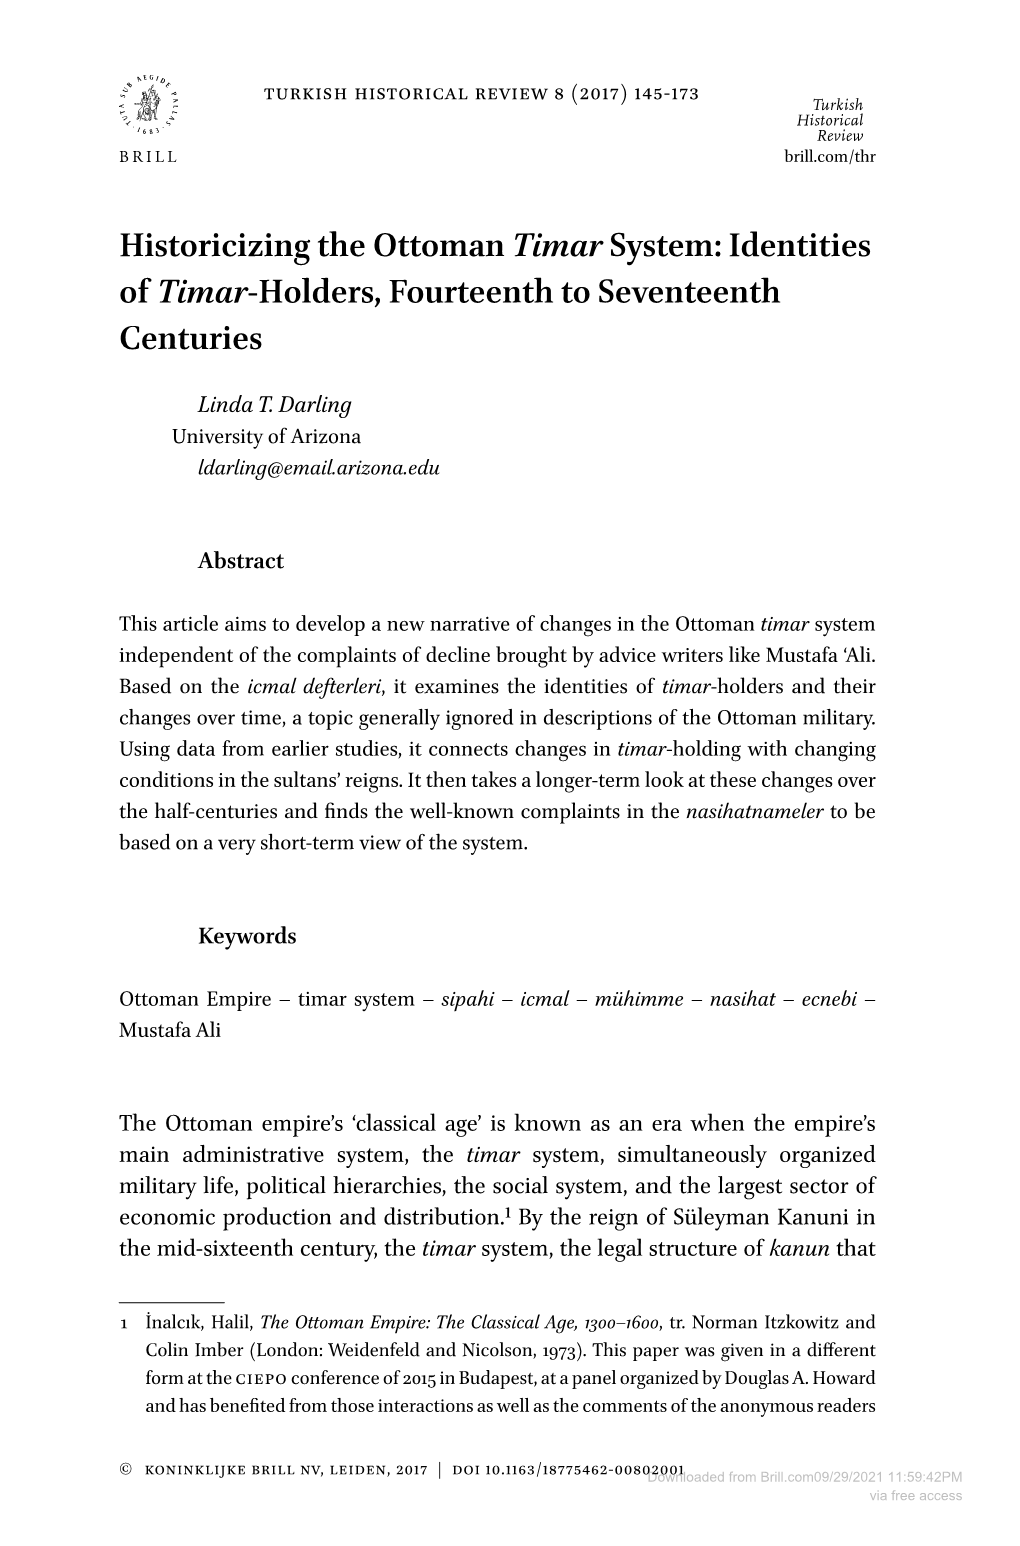 Historicizing the Ottoman Timar System: Identities of Timar-Holders, Fourteenth to Seventeenth Centuries